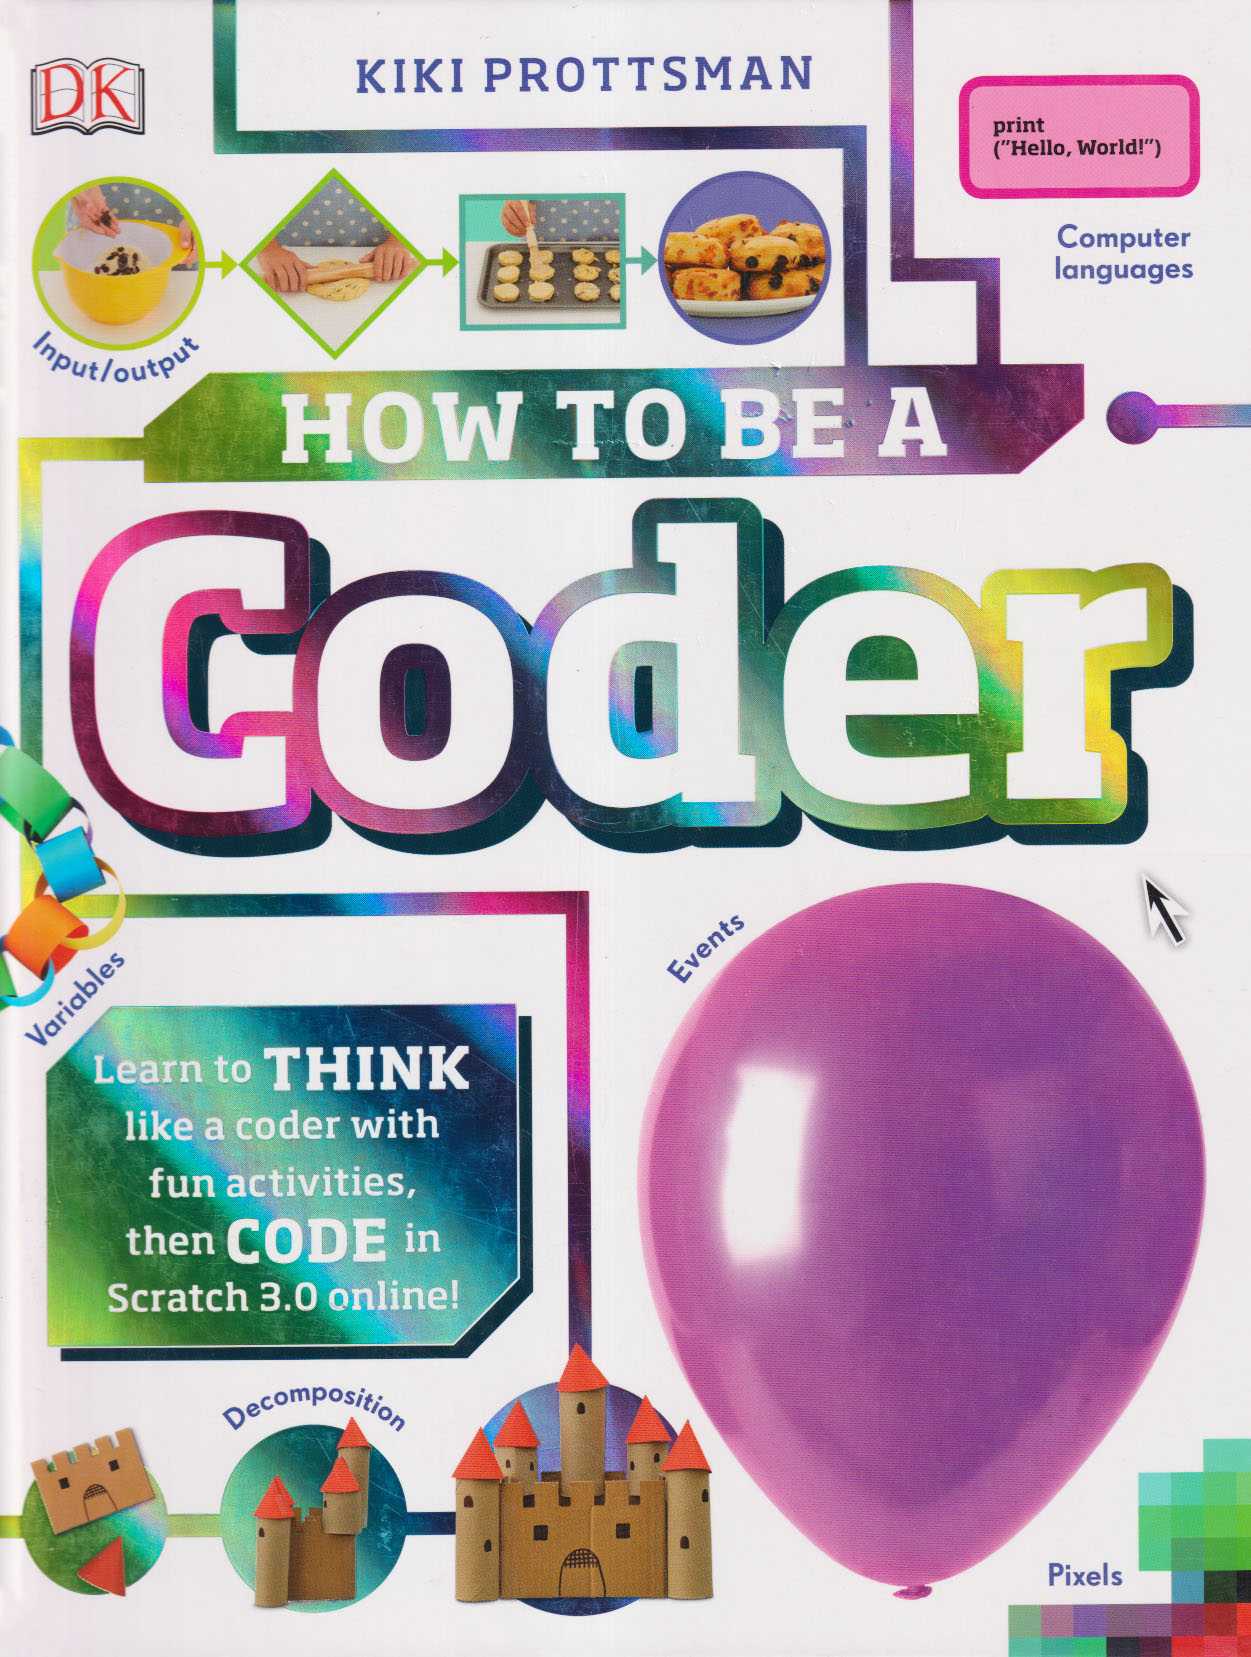 How To Be a Coder (হার্ডকভার)